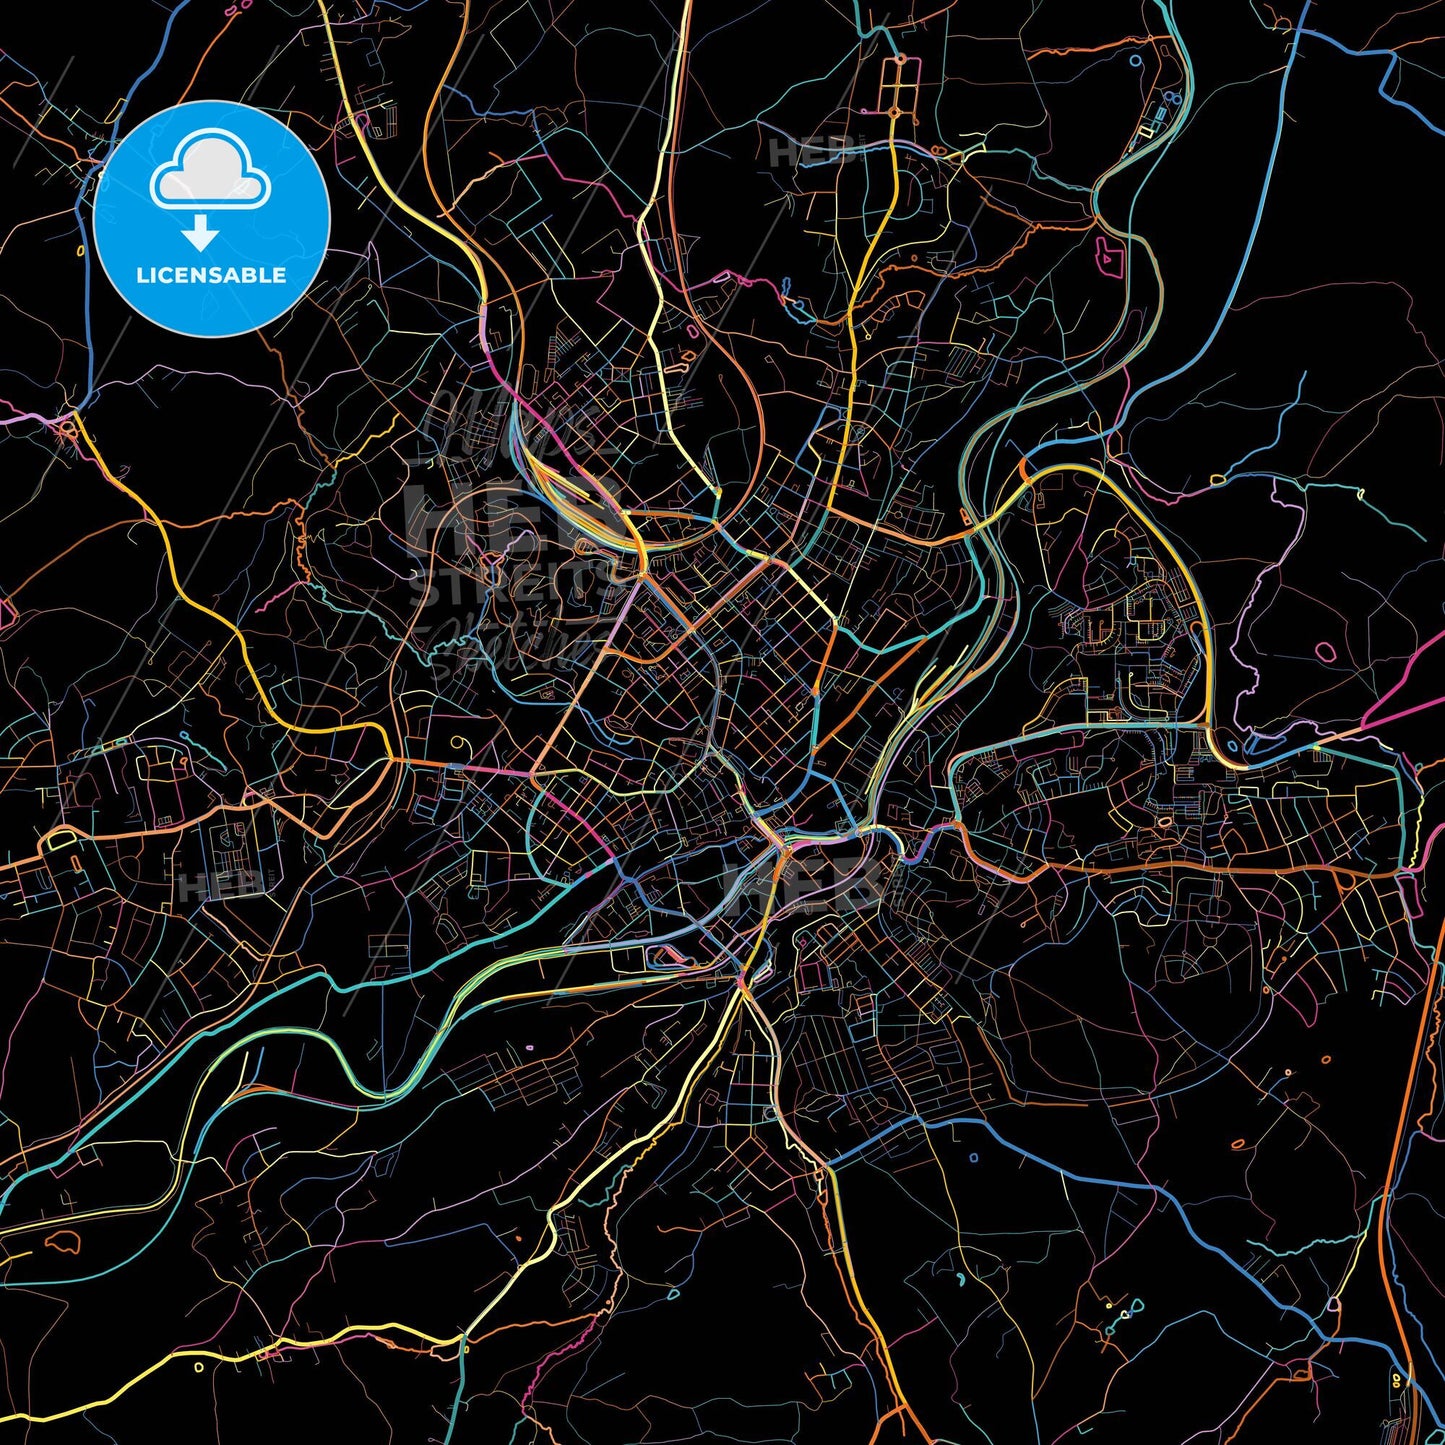 Plauen, Saxony, Germany, colorful city map on black background